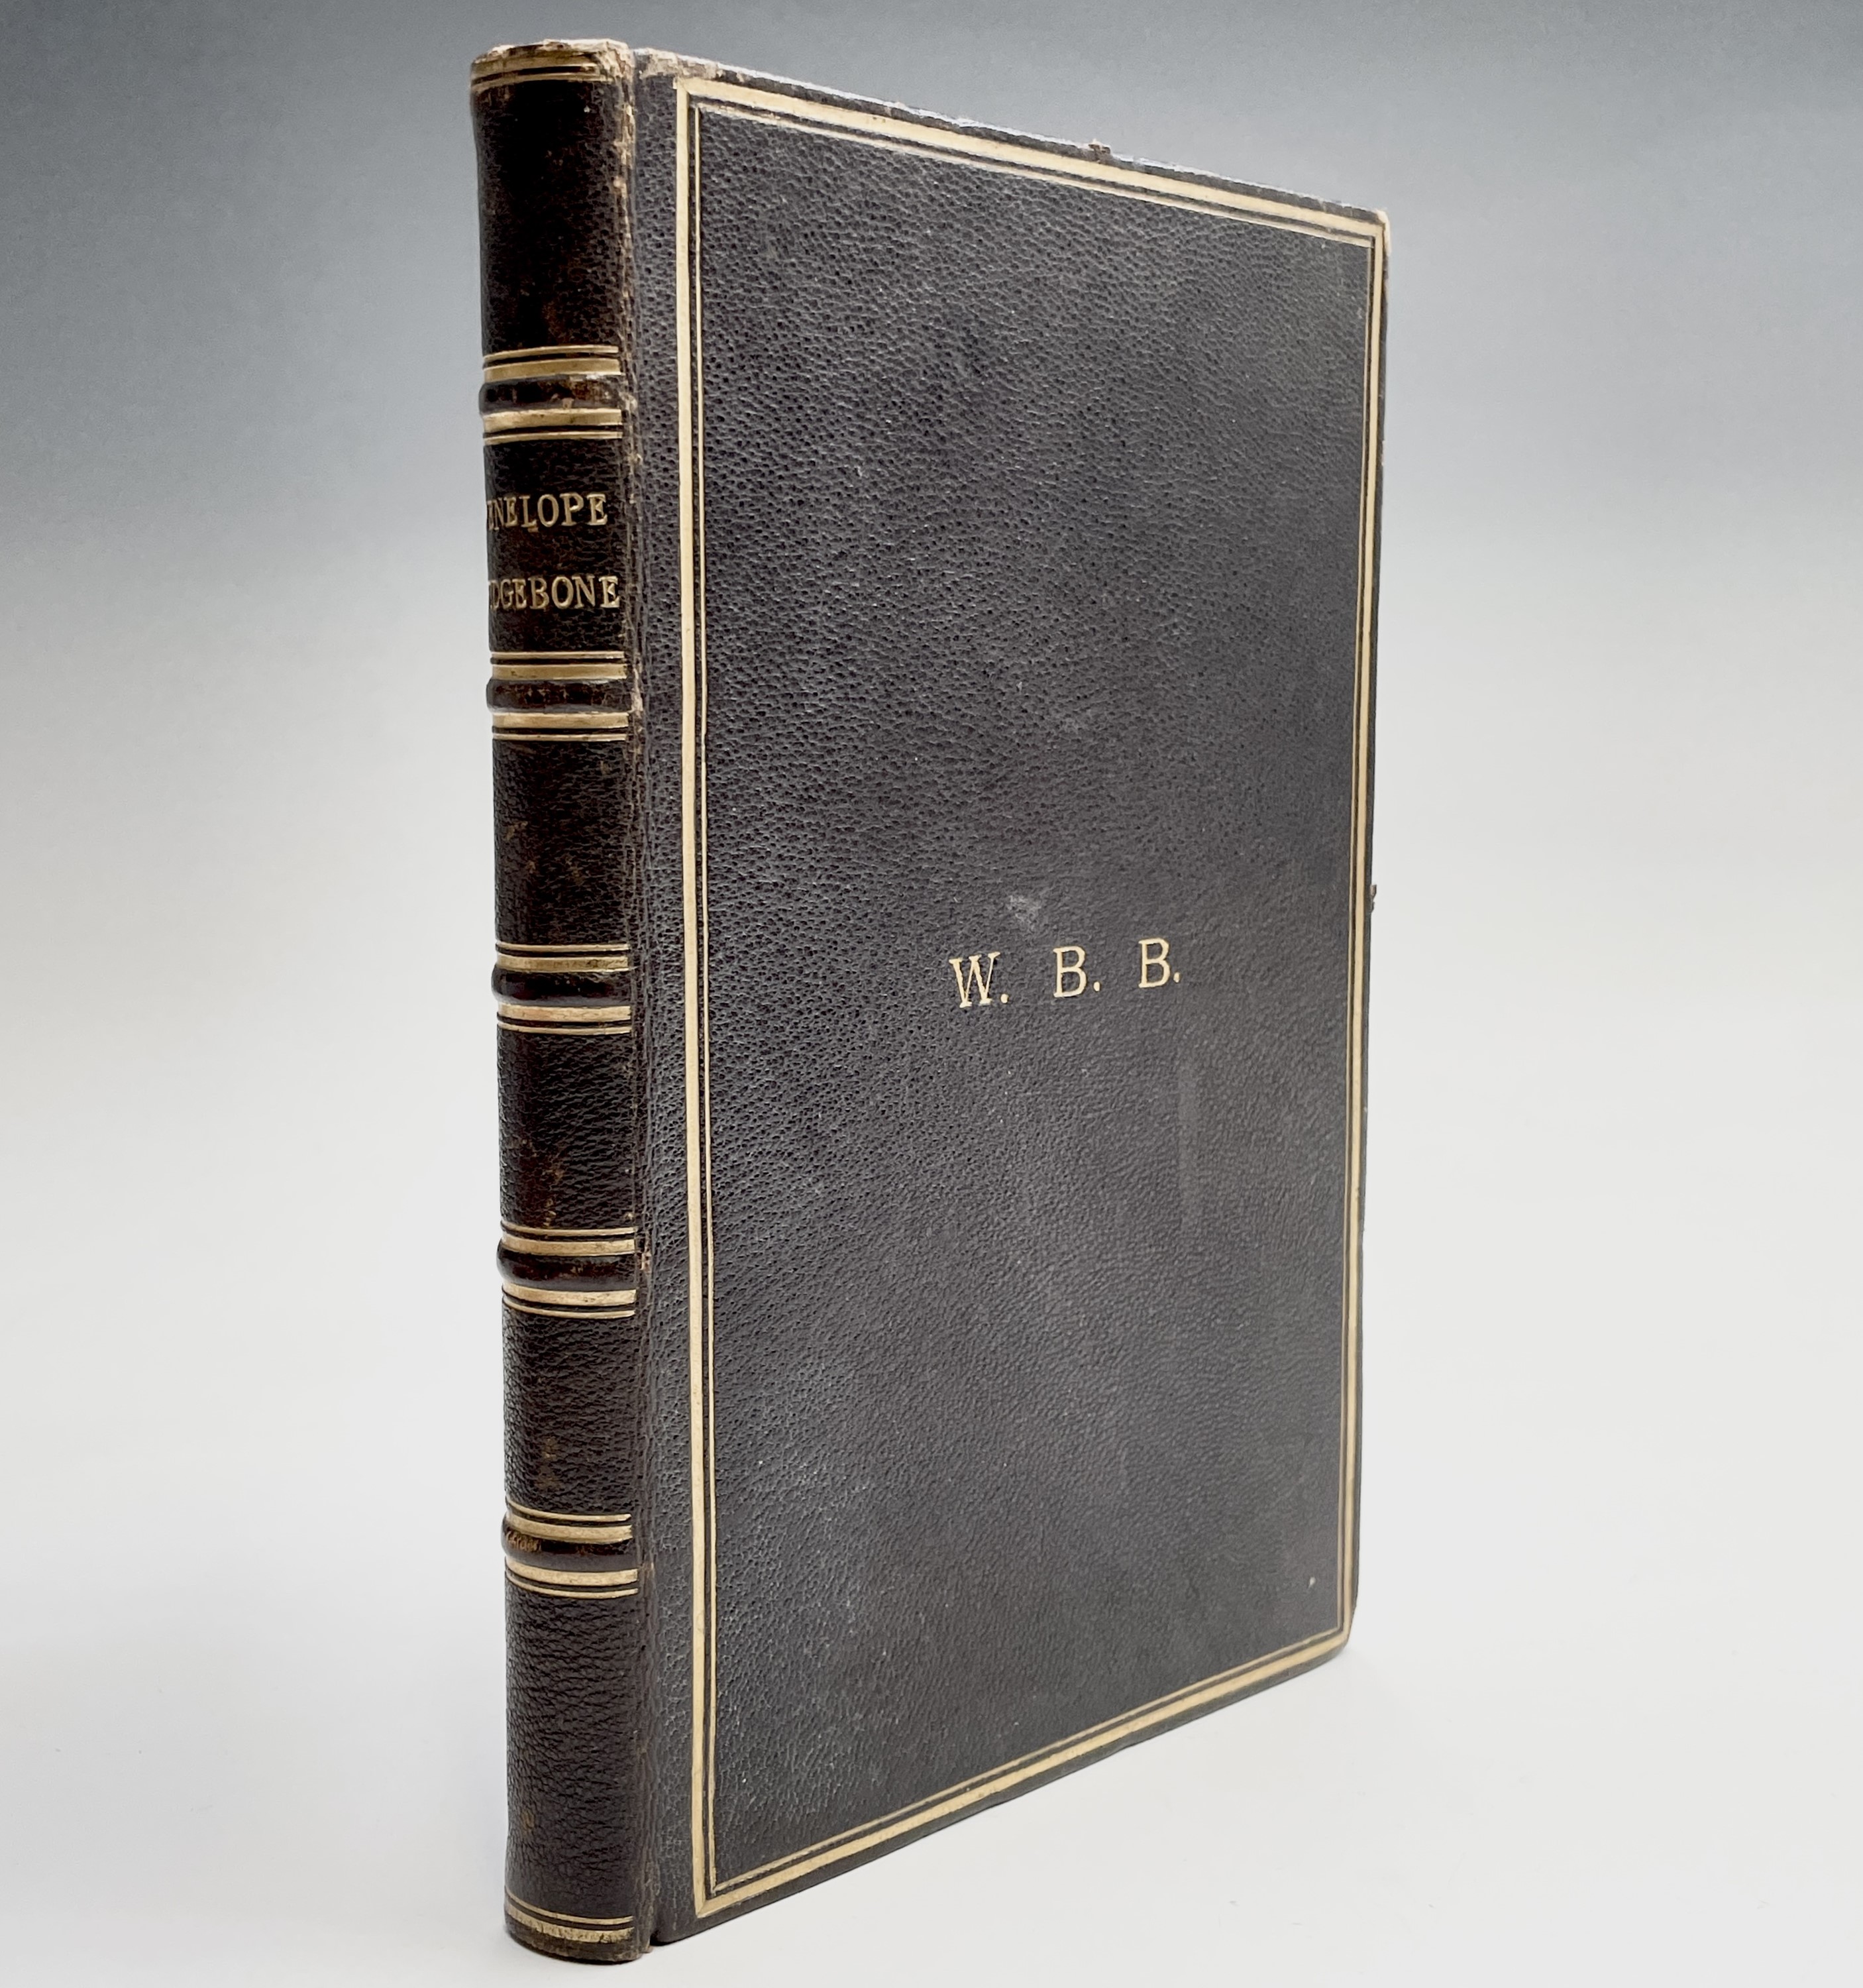 LIEUT-COL HORT. 'Penelope Wedgebone: The Supposed Heiress.' First Edition, eight hand-coloured